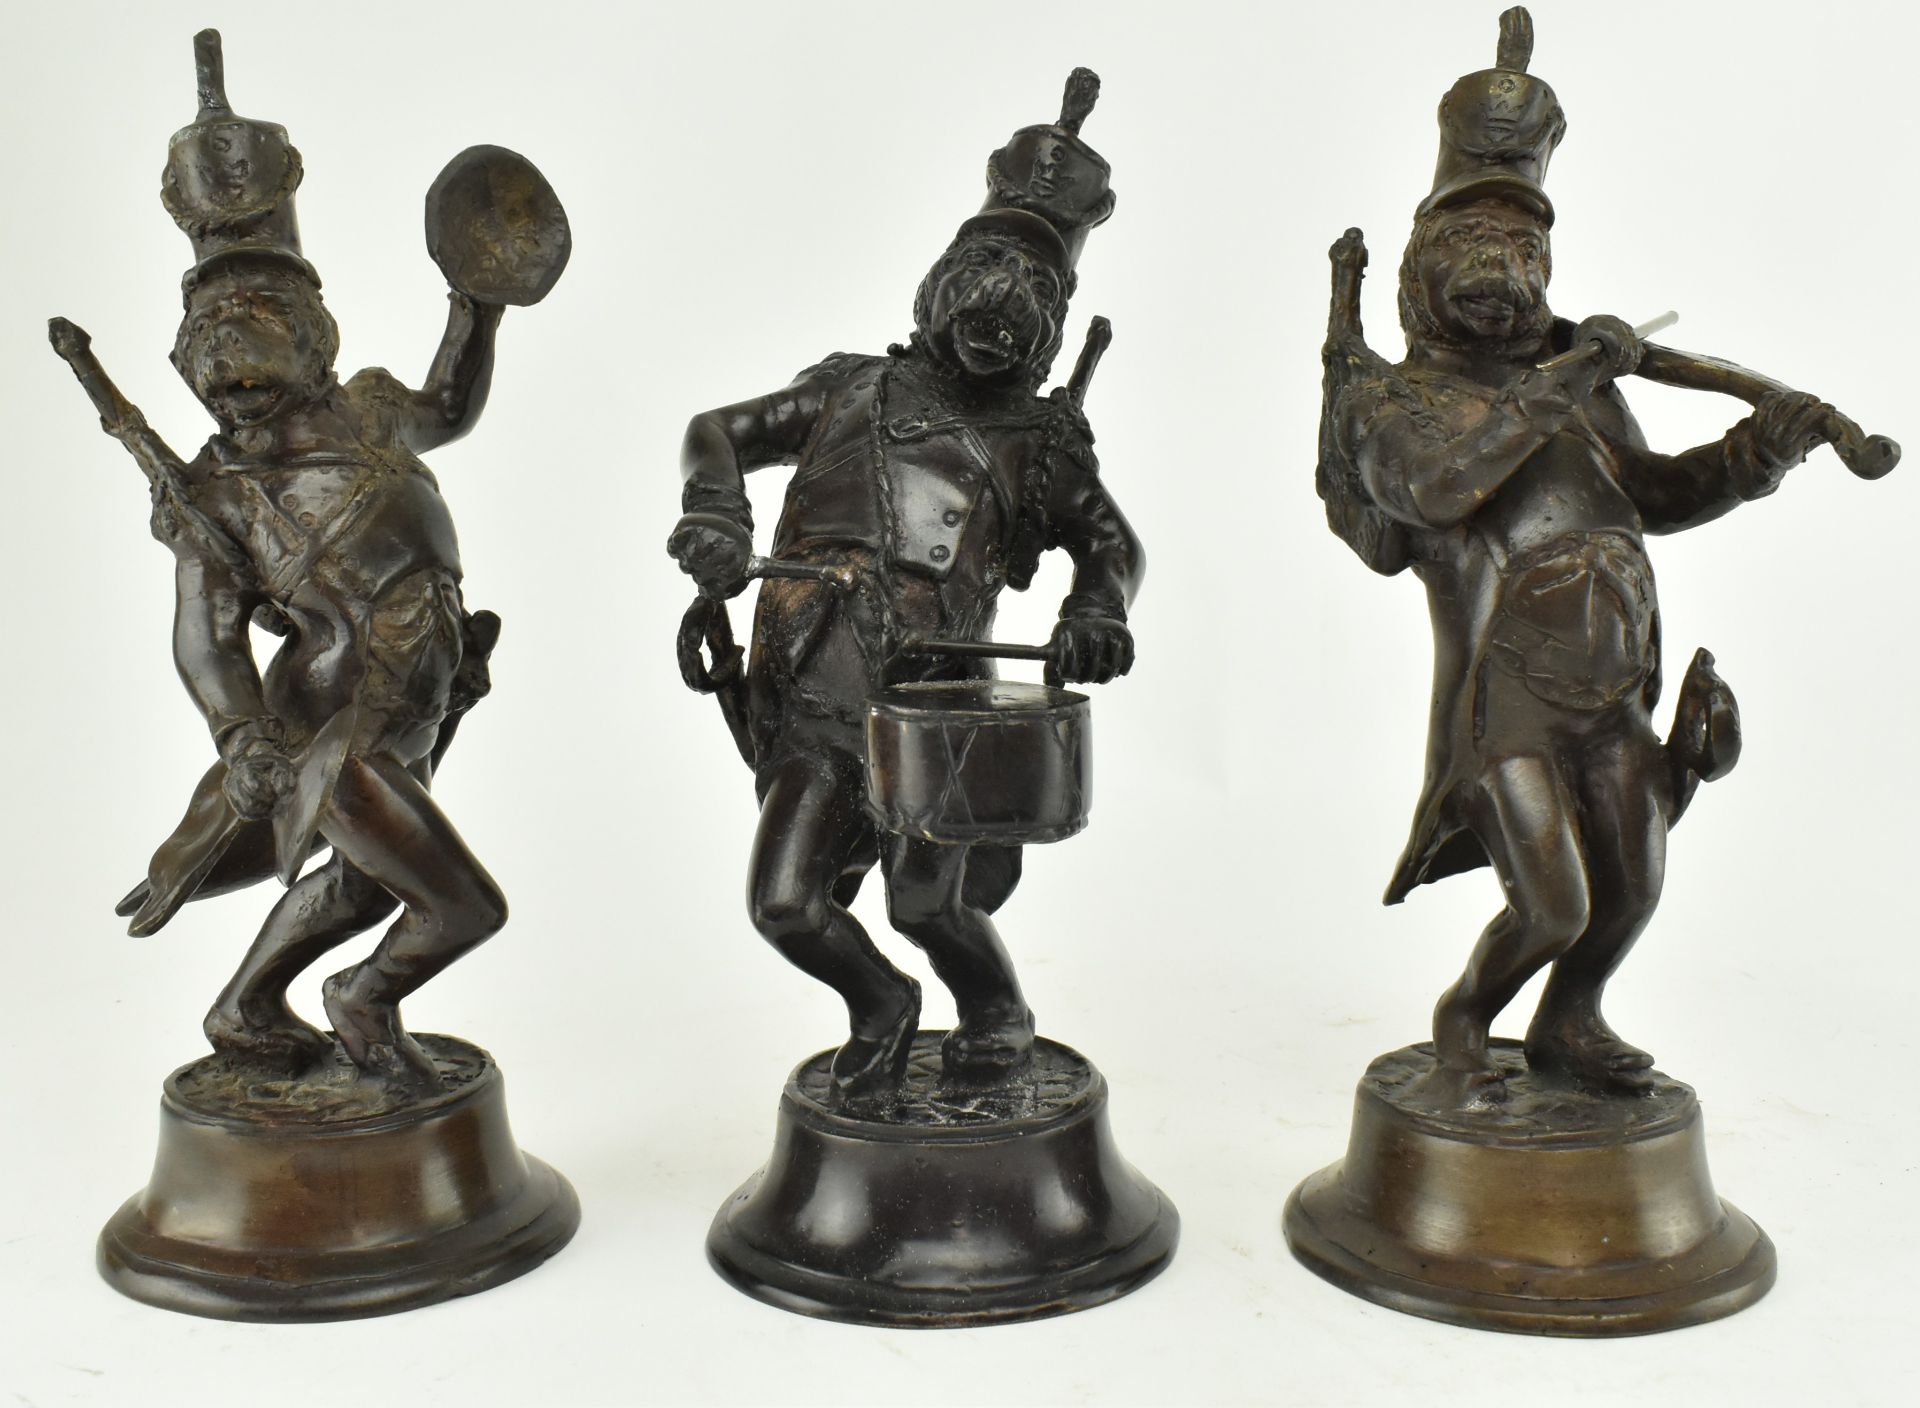 THREE FRENCH 19TH CENTURY BRONZES OF MONKEY SOLDIER BAND